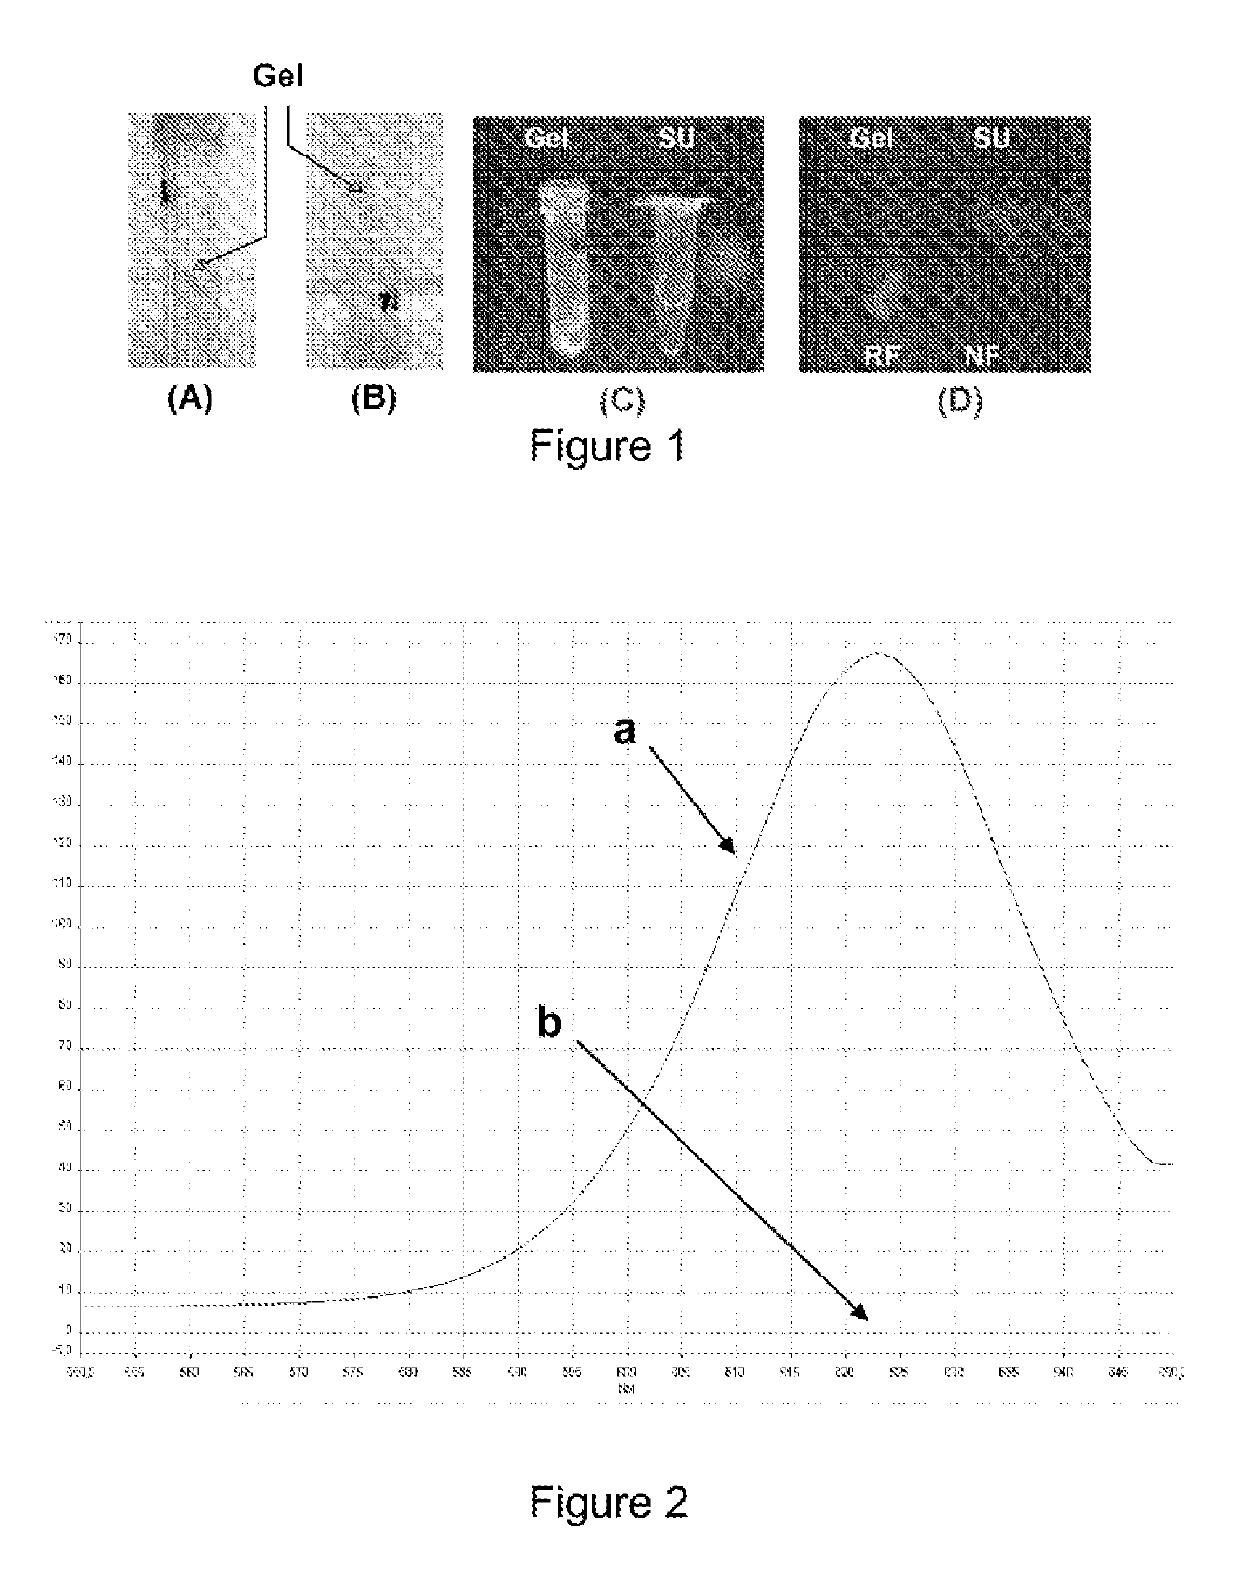 Hydrogel-based decontamination of aqueous samples containing nanoparticles